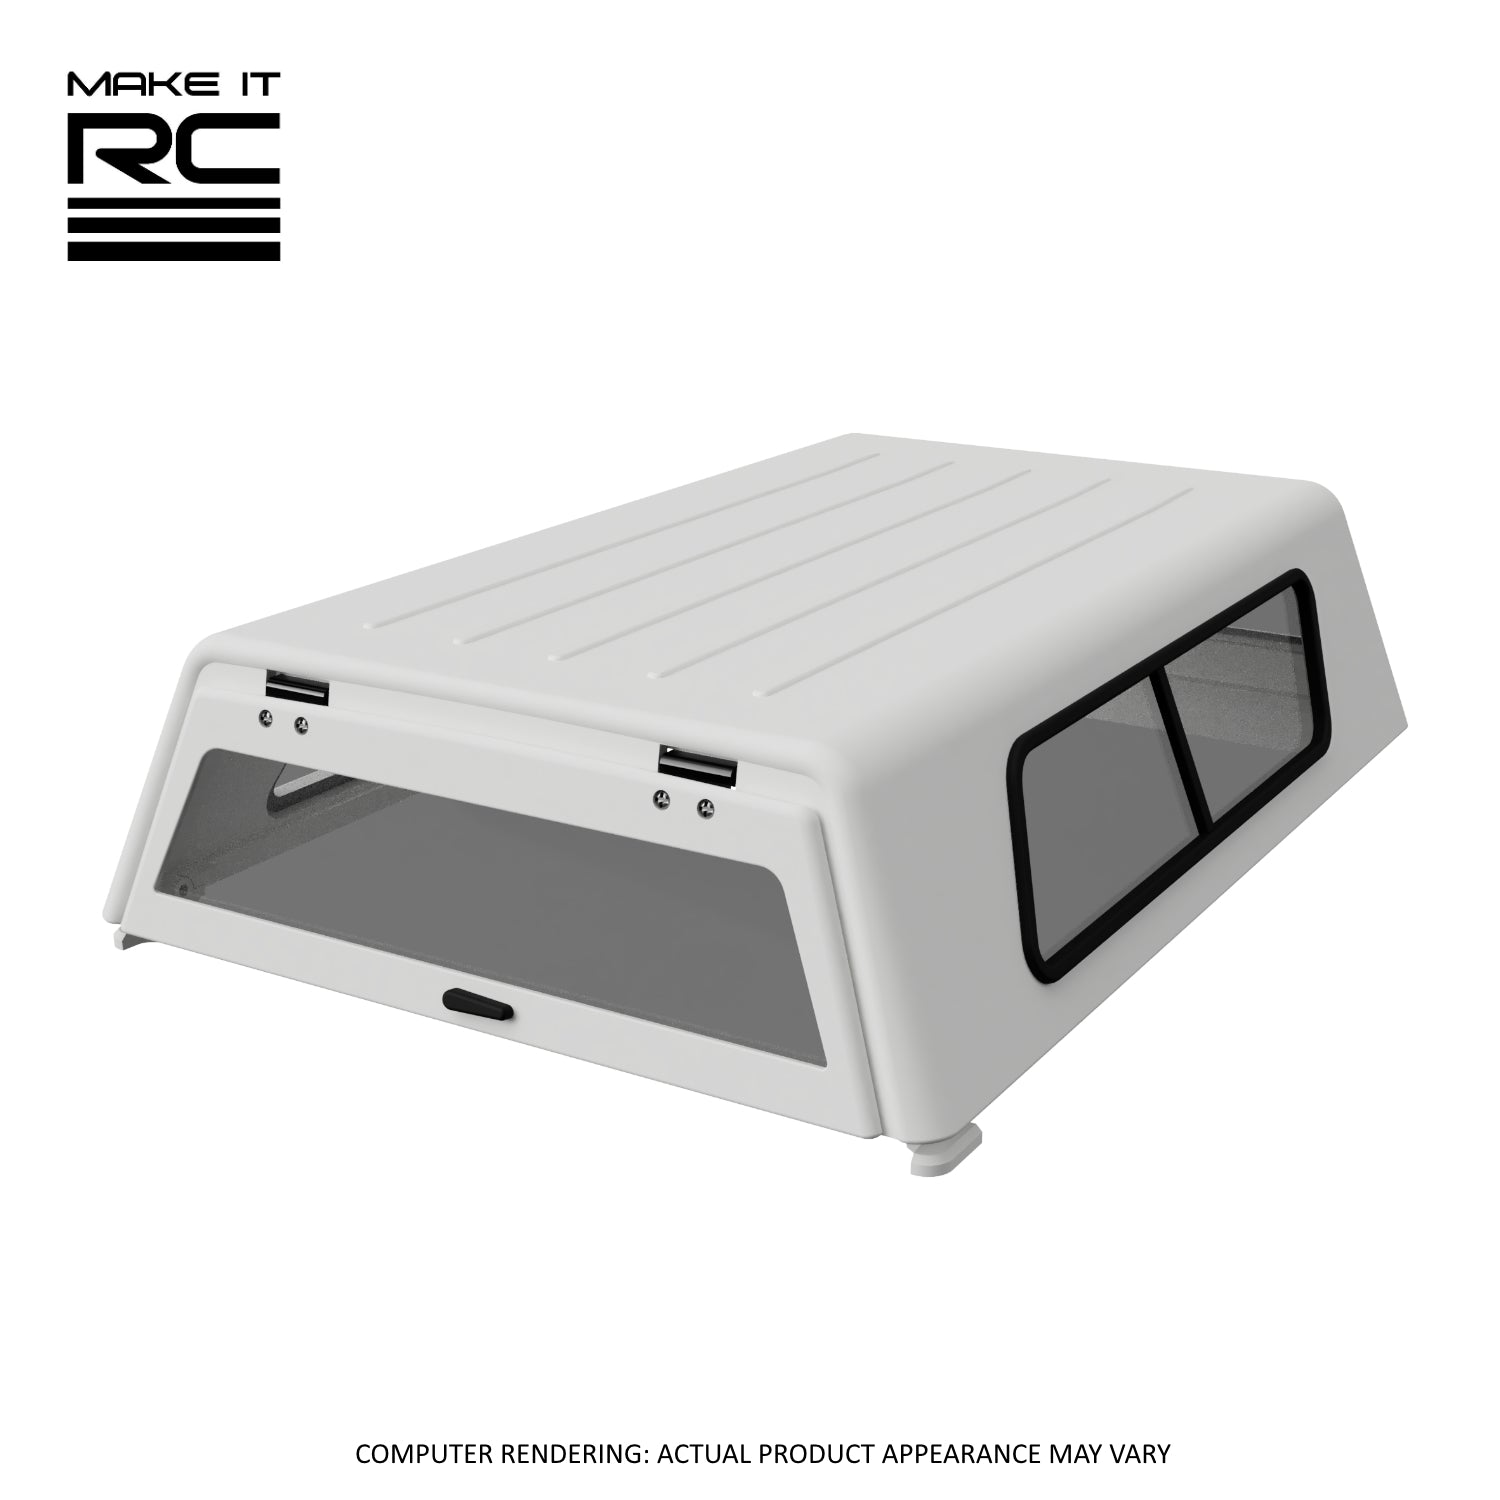 Make It RC Bed Cap/Camper Shell Kit for FMS Chevy K10 and Eazy RC Glacier